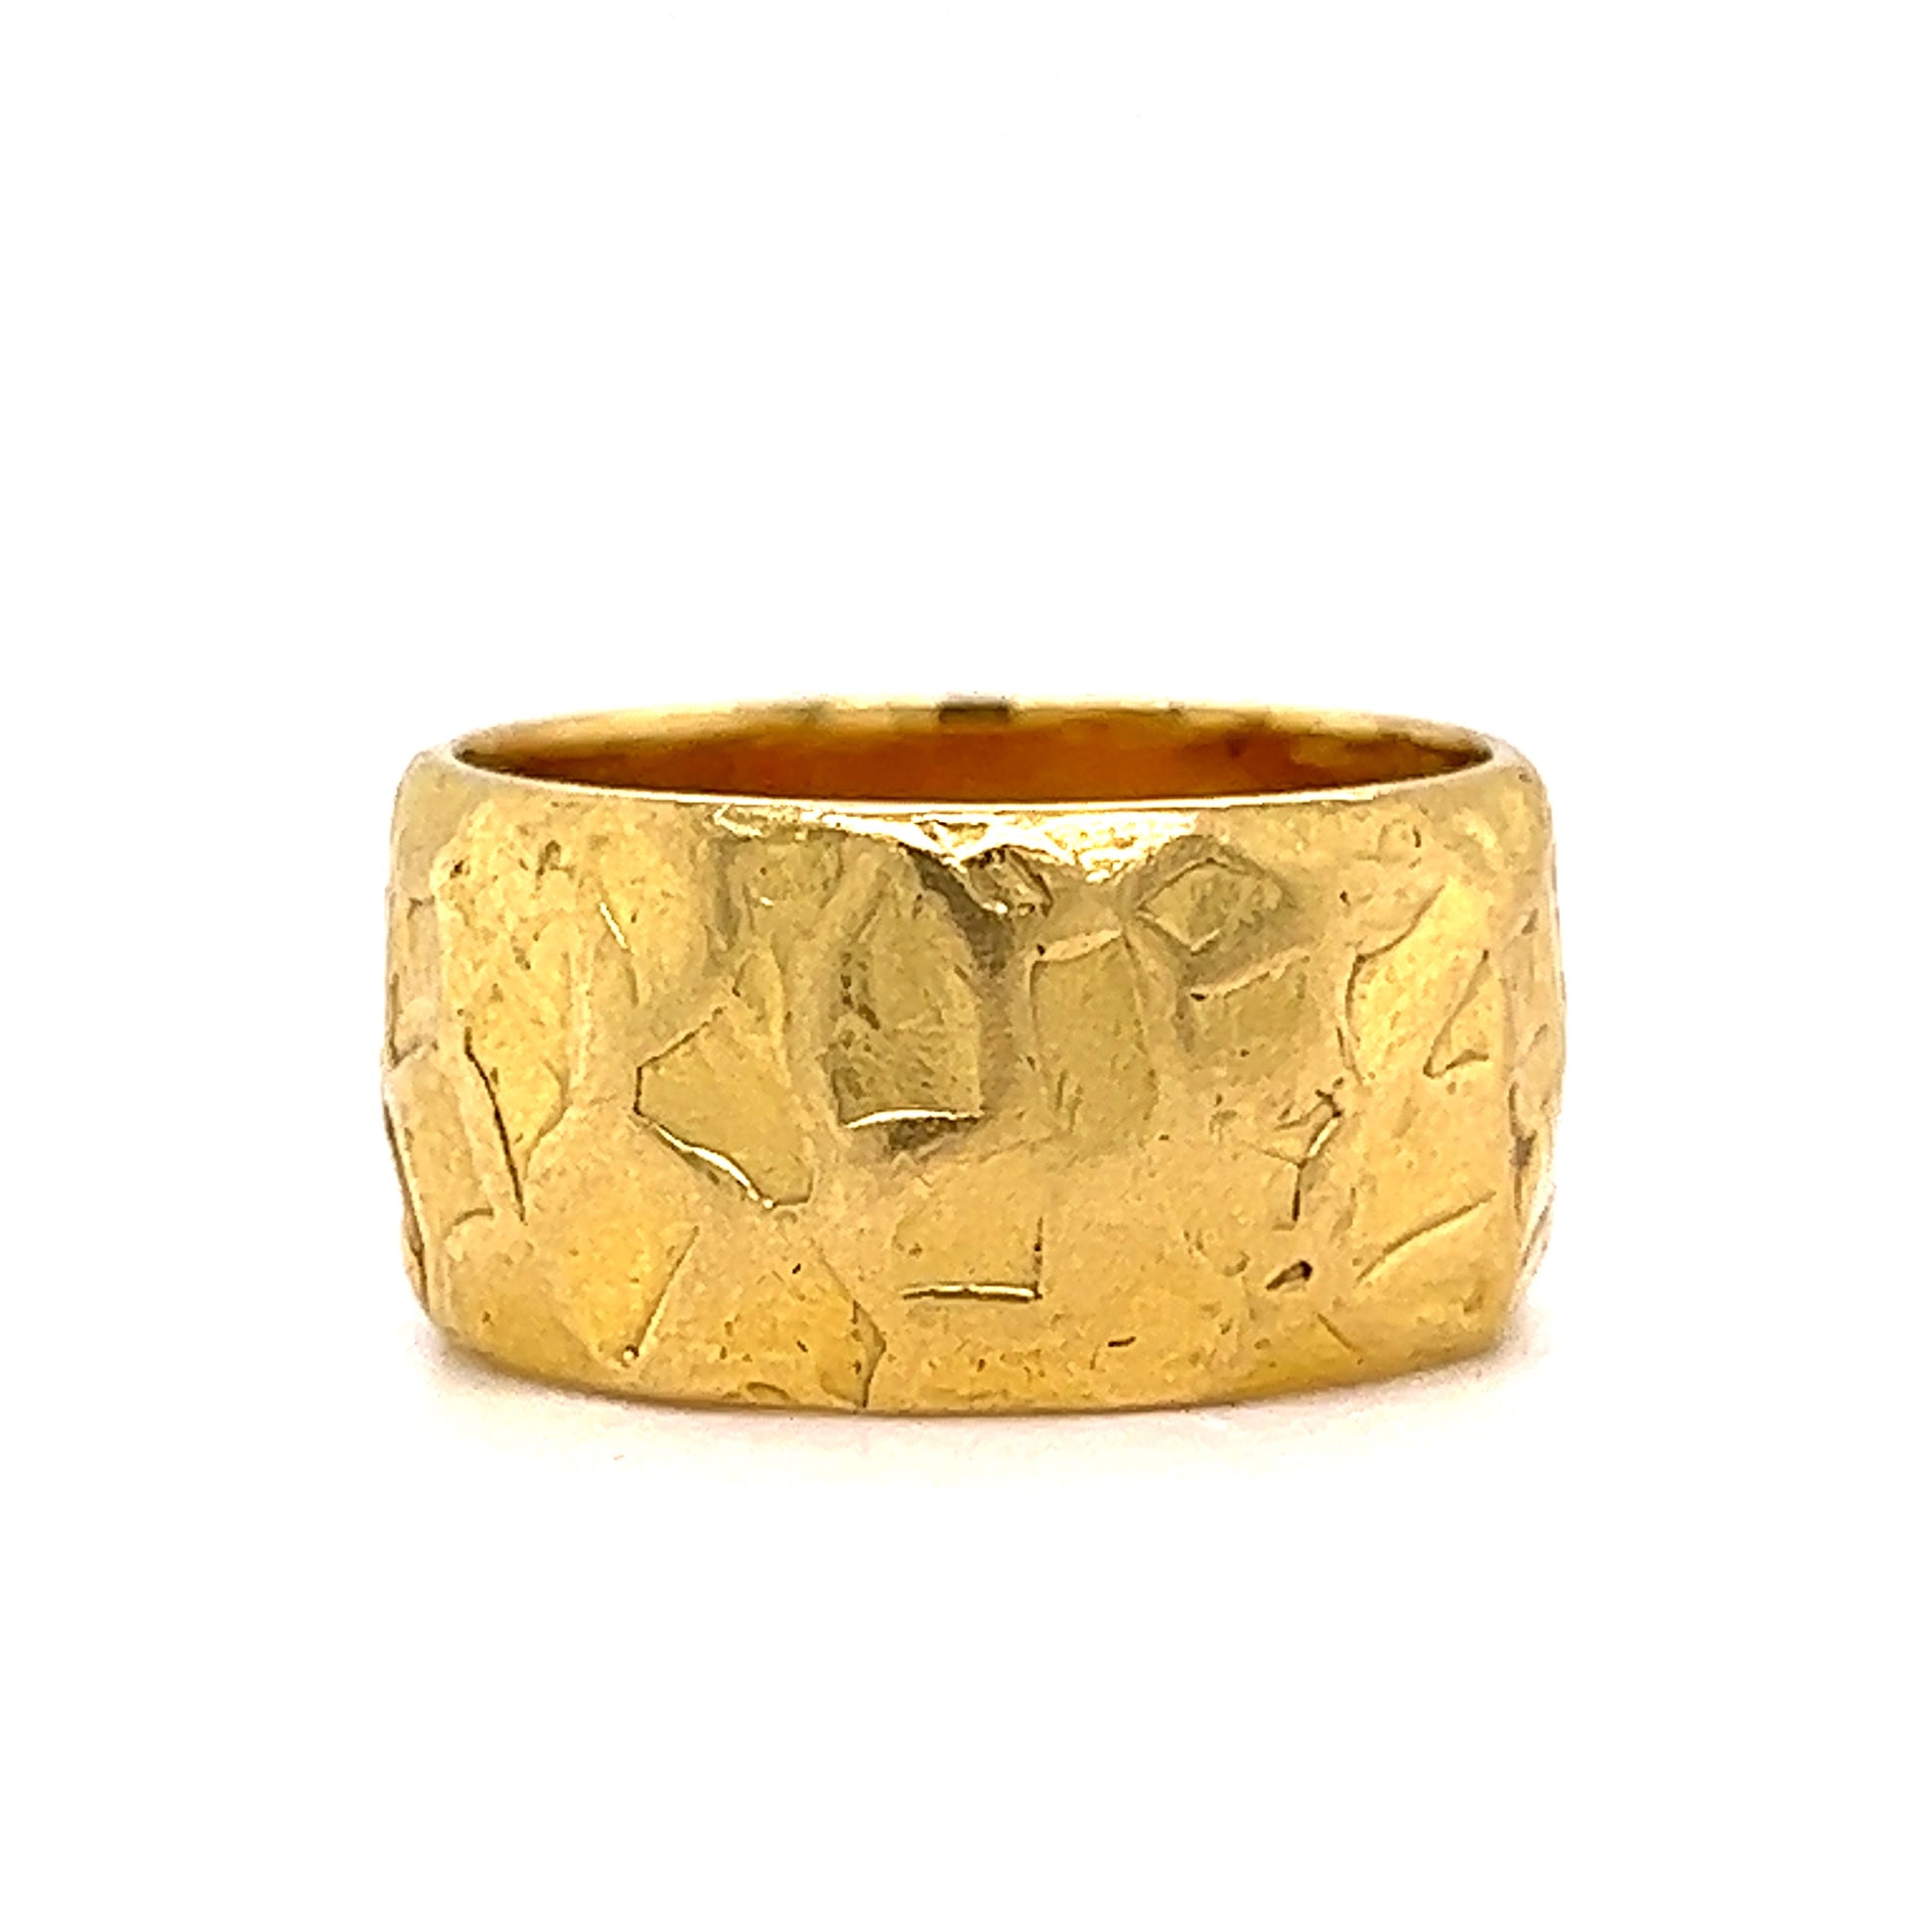 10mm Textured Band in 18k Yellow GoldComposition: 18 Karat Yellow GoldRing Size: 6.5Total Gram Weight: 9.4 g